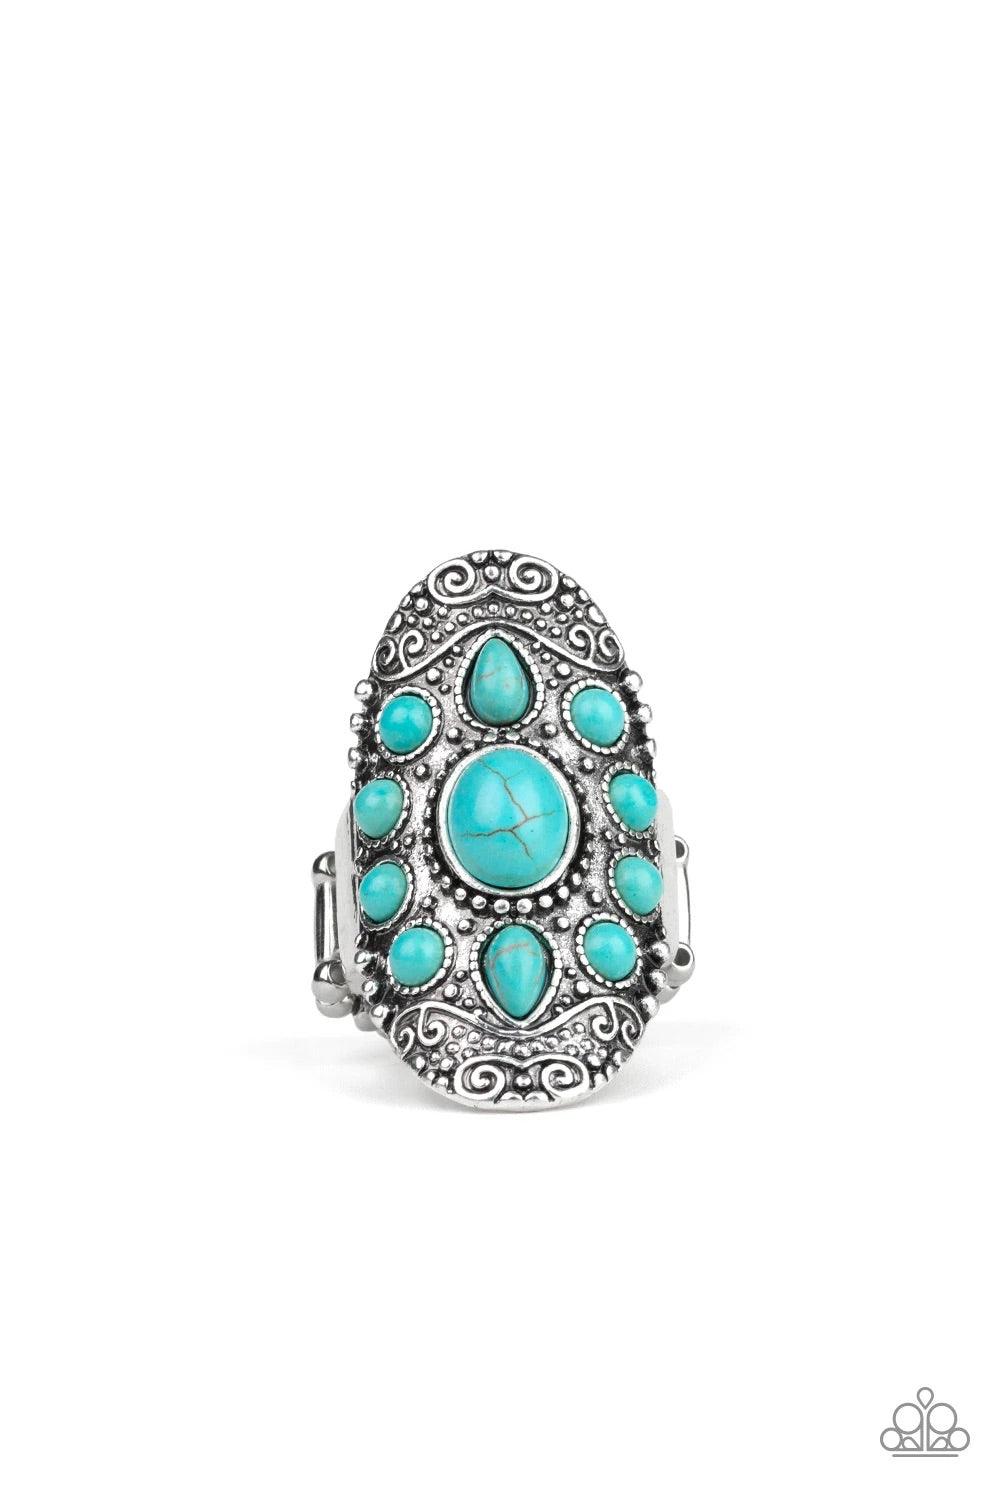 Paparazzi Accessories Stone Sunrise - Blue Embossed in a studded filigree pattern, an oval silver frame folds around the finger. Featuring round, oval, and teardrop shapes, refreshing turquoise stone beads are pressed into the center of the frame, creatin